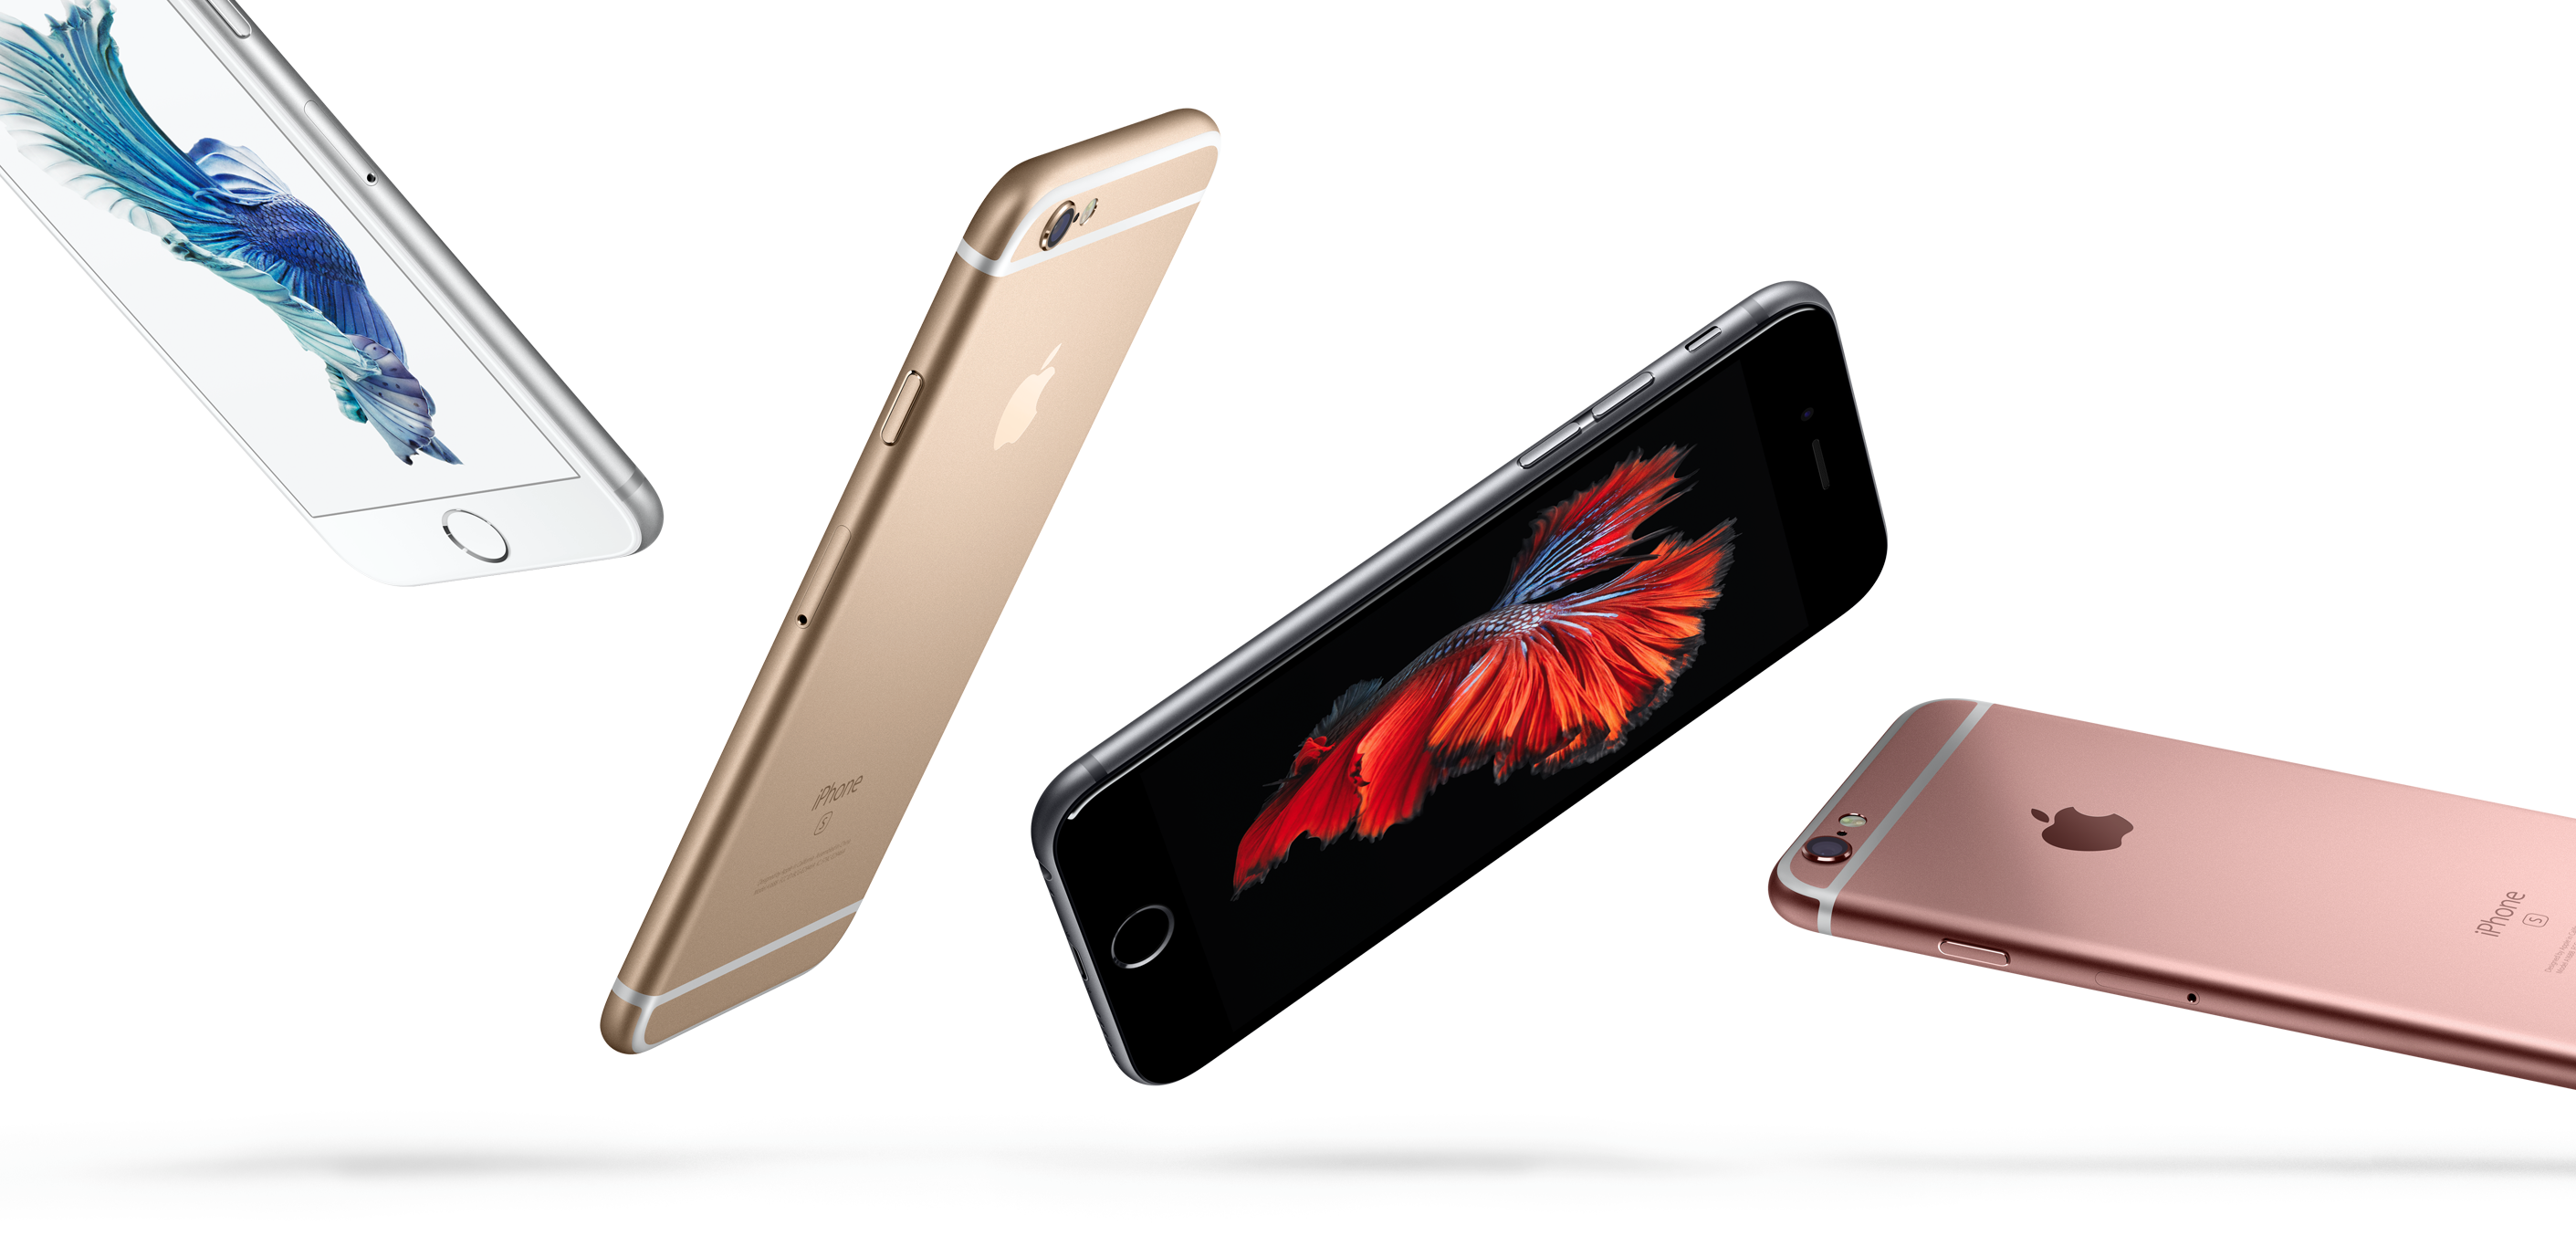 Everything You Need To Know About The Iphone 6s And 6s Plus